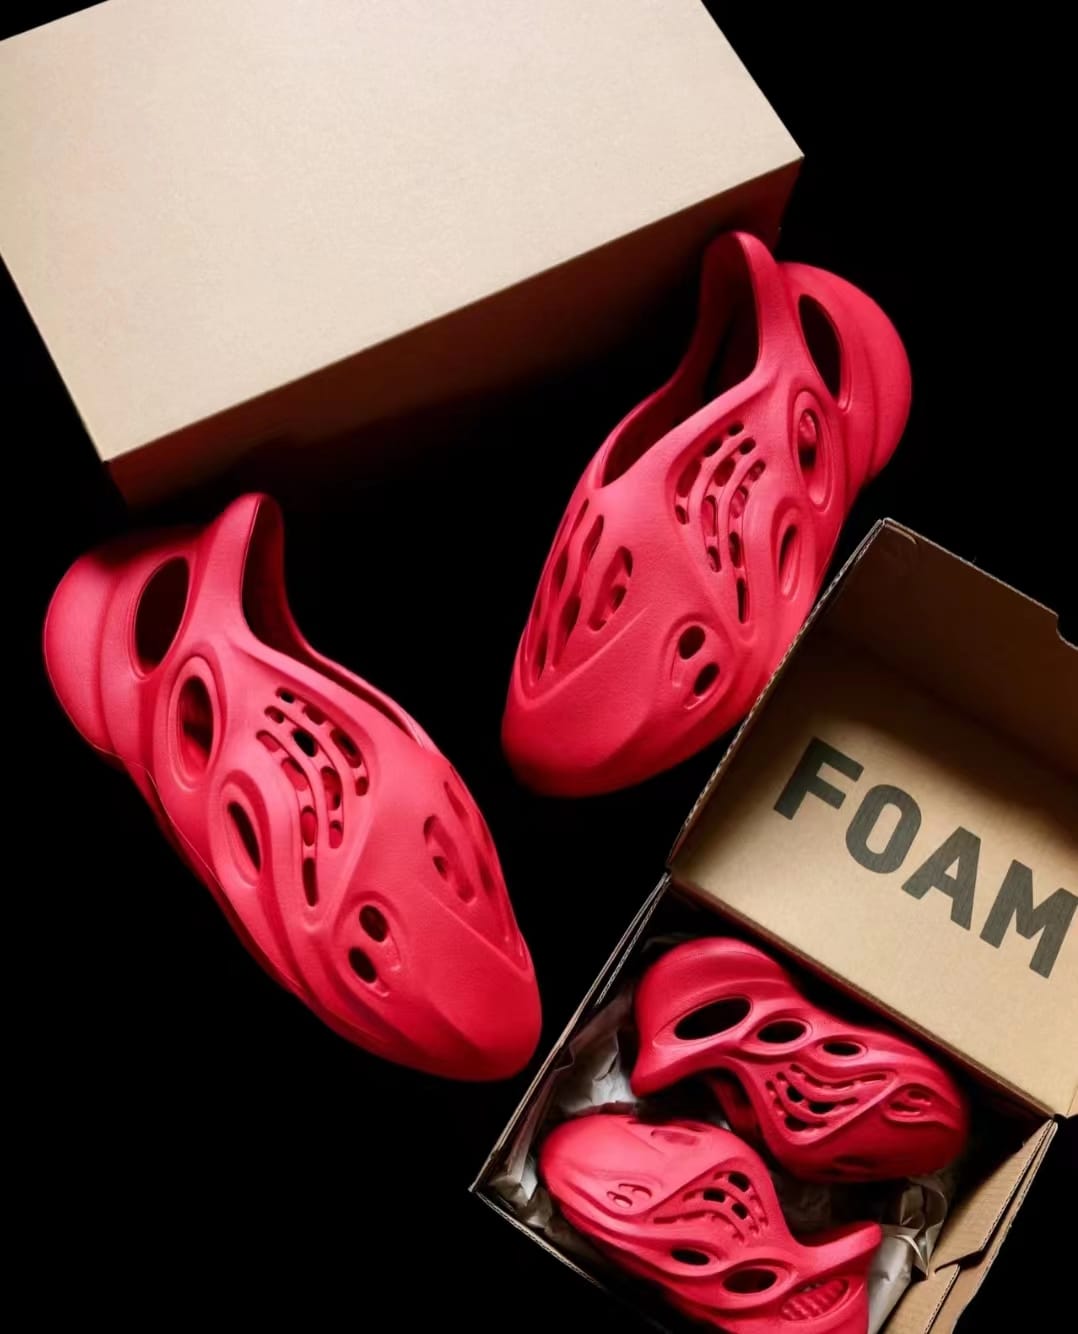 Yeezy Foam Runner Vermillion Reps: Embracing Boldness and Innovation